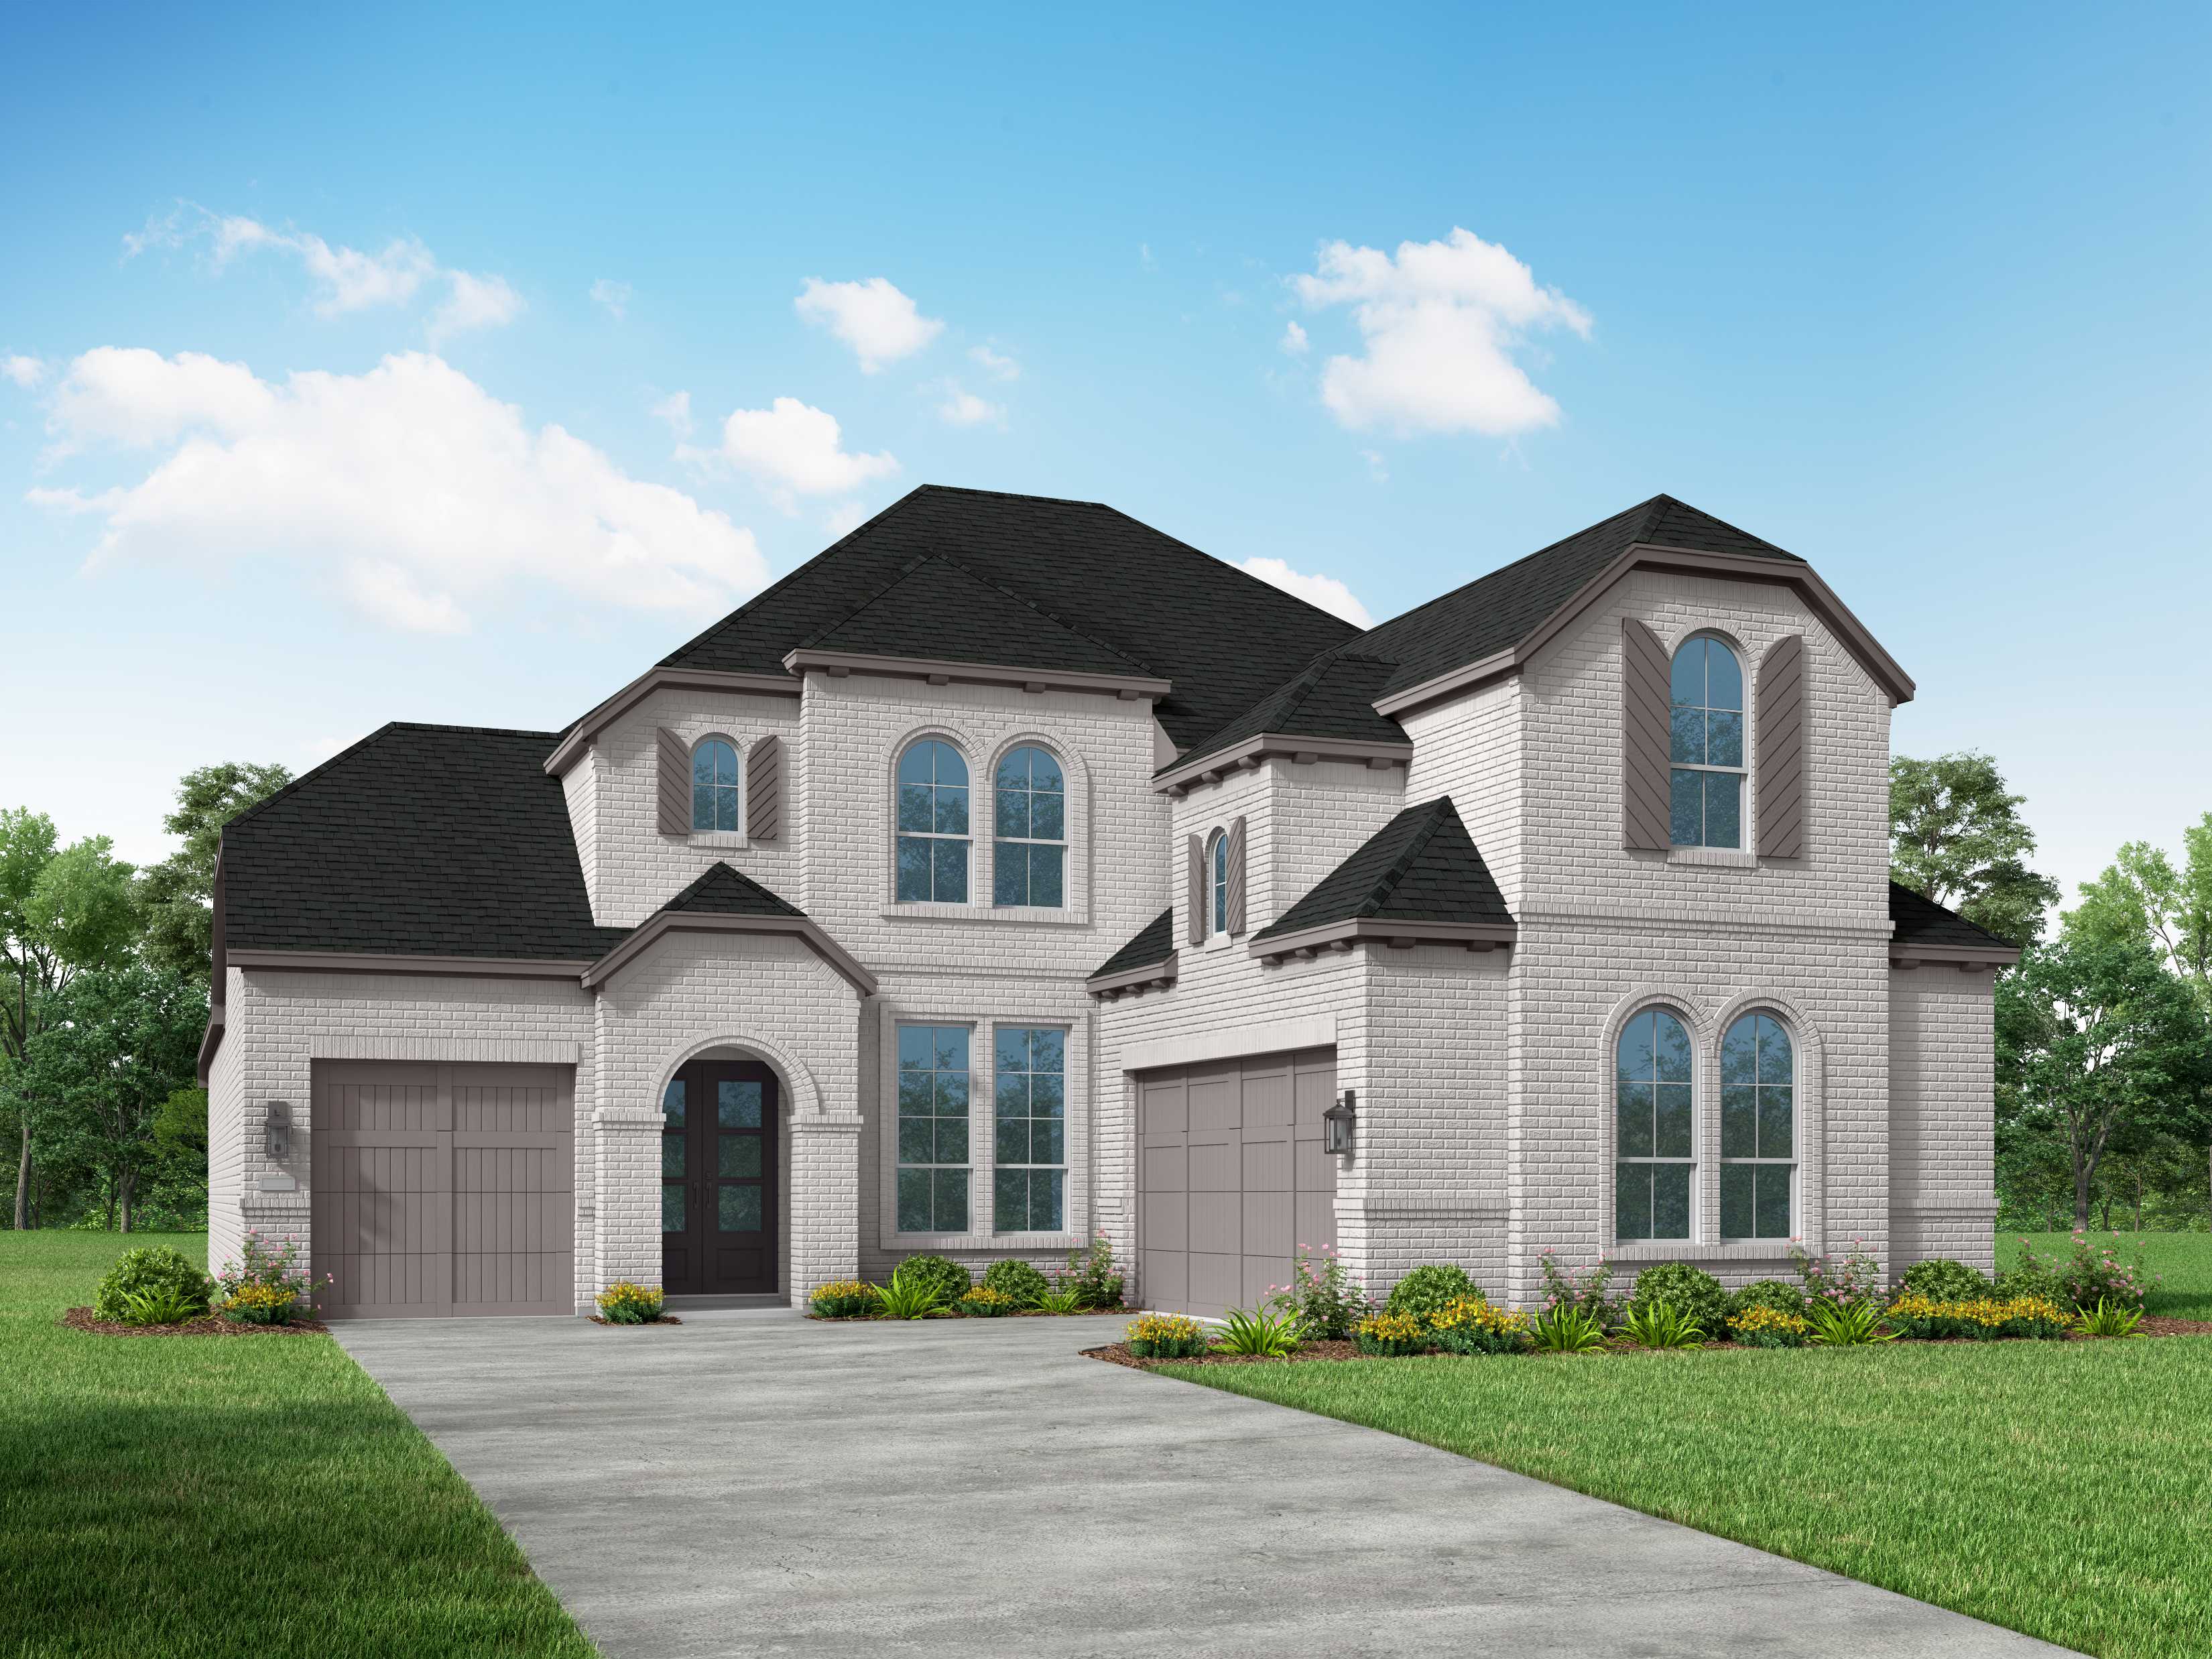 New Home Plan 227 In Boerne Tx 78006